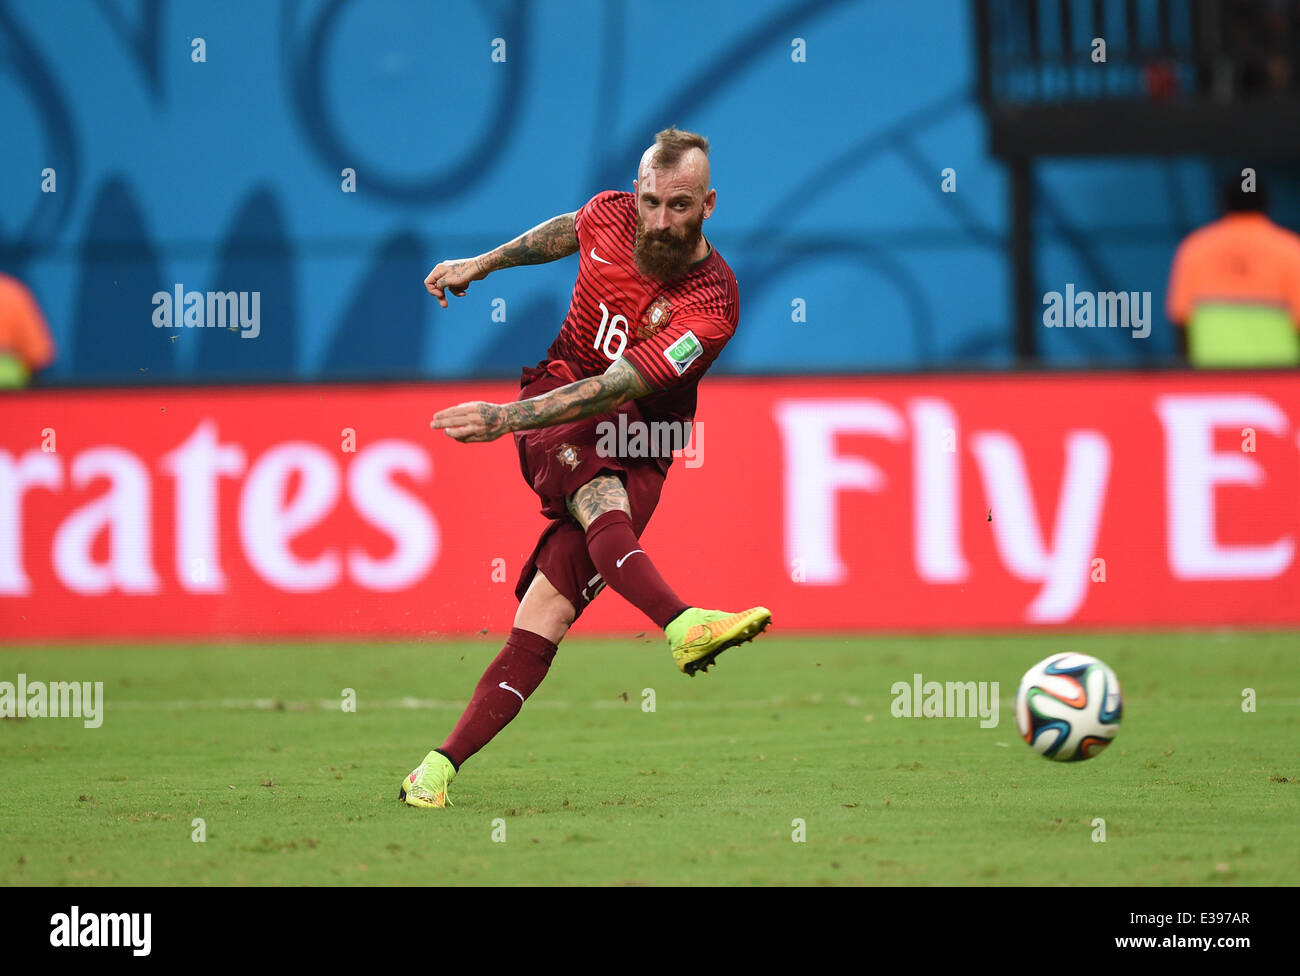 Manaus, Brazil. 22nd June, 2014. Raul Meireles of Portugal in action during the FIFA World Cup 2014 group G preliminary round match between the USA and Portugal at the Arena Amazonia Stadium in Manaus, Brazil, 22 June 2014. Photo: Marius Becker/dpa/Alamy Live News Stock Photo